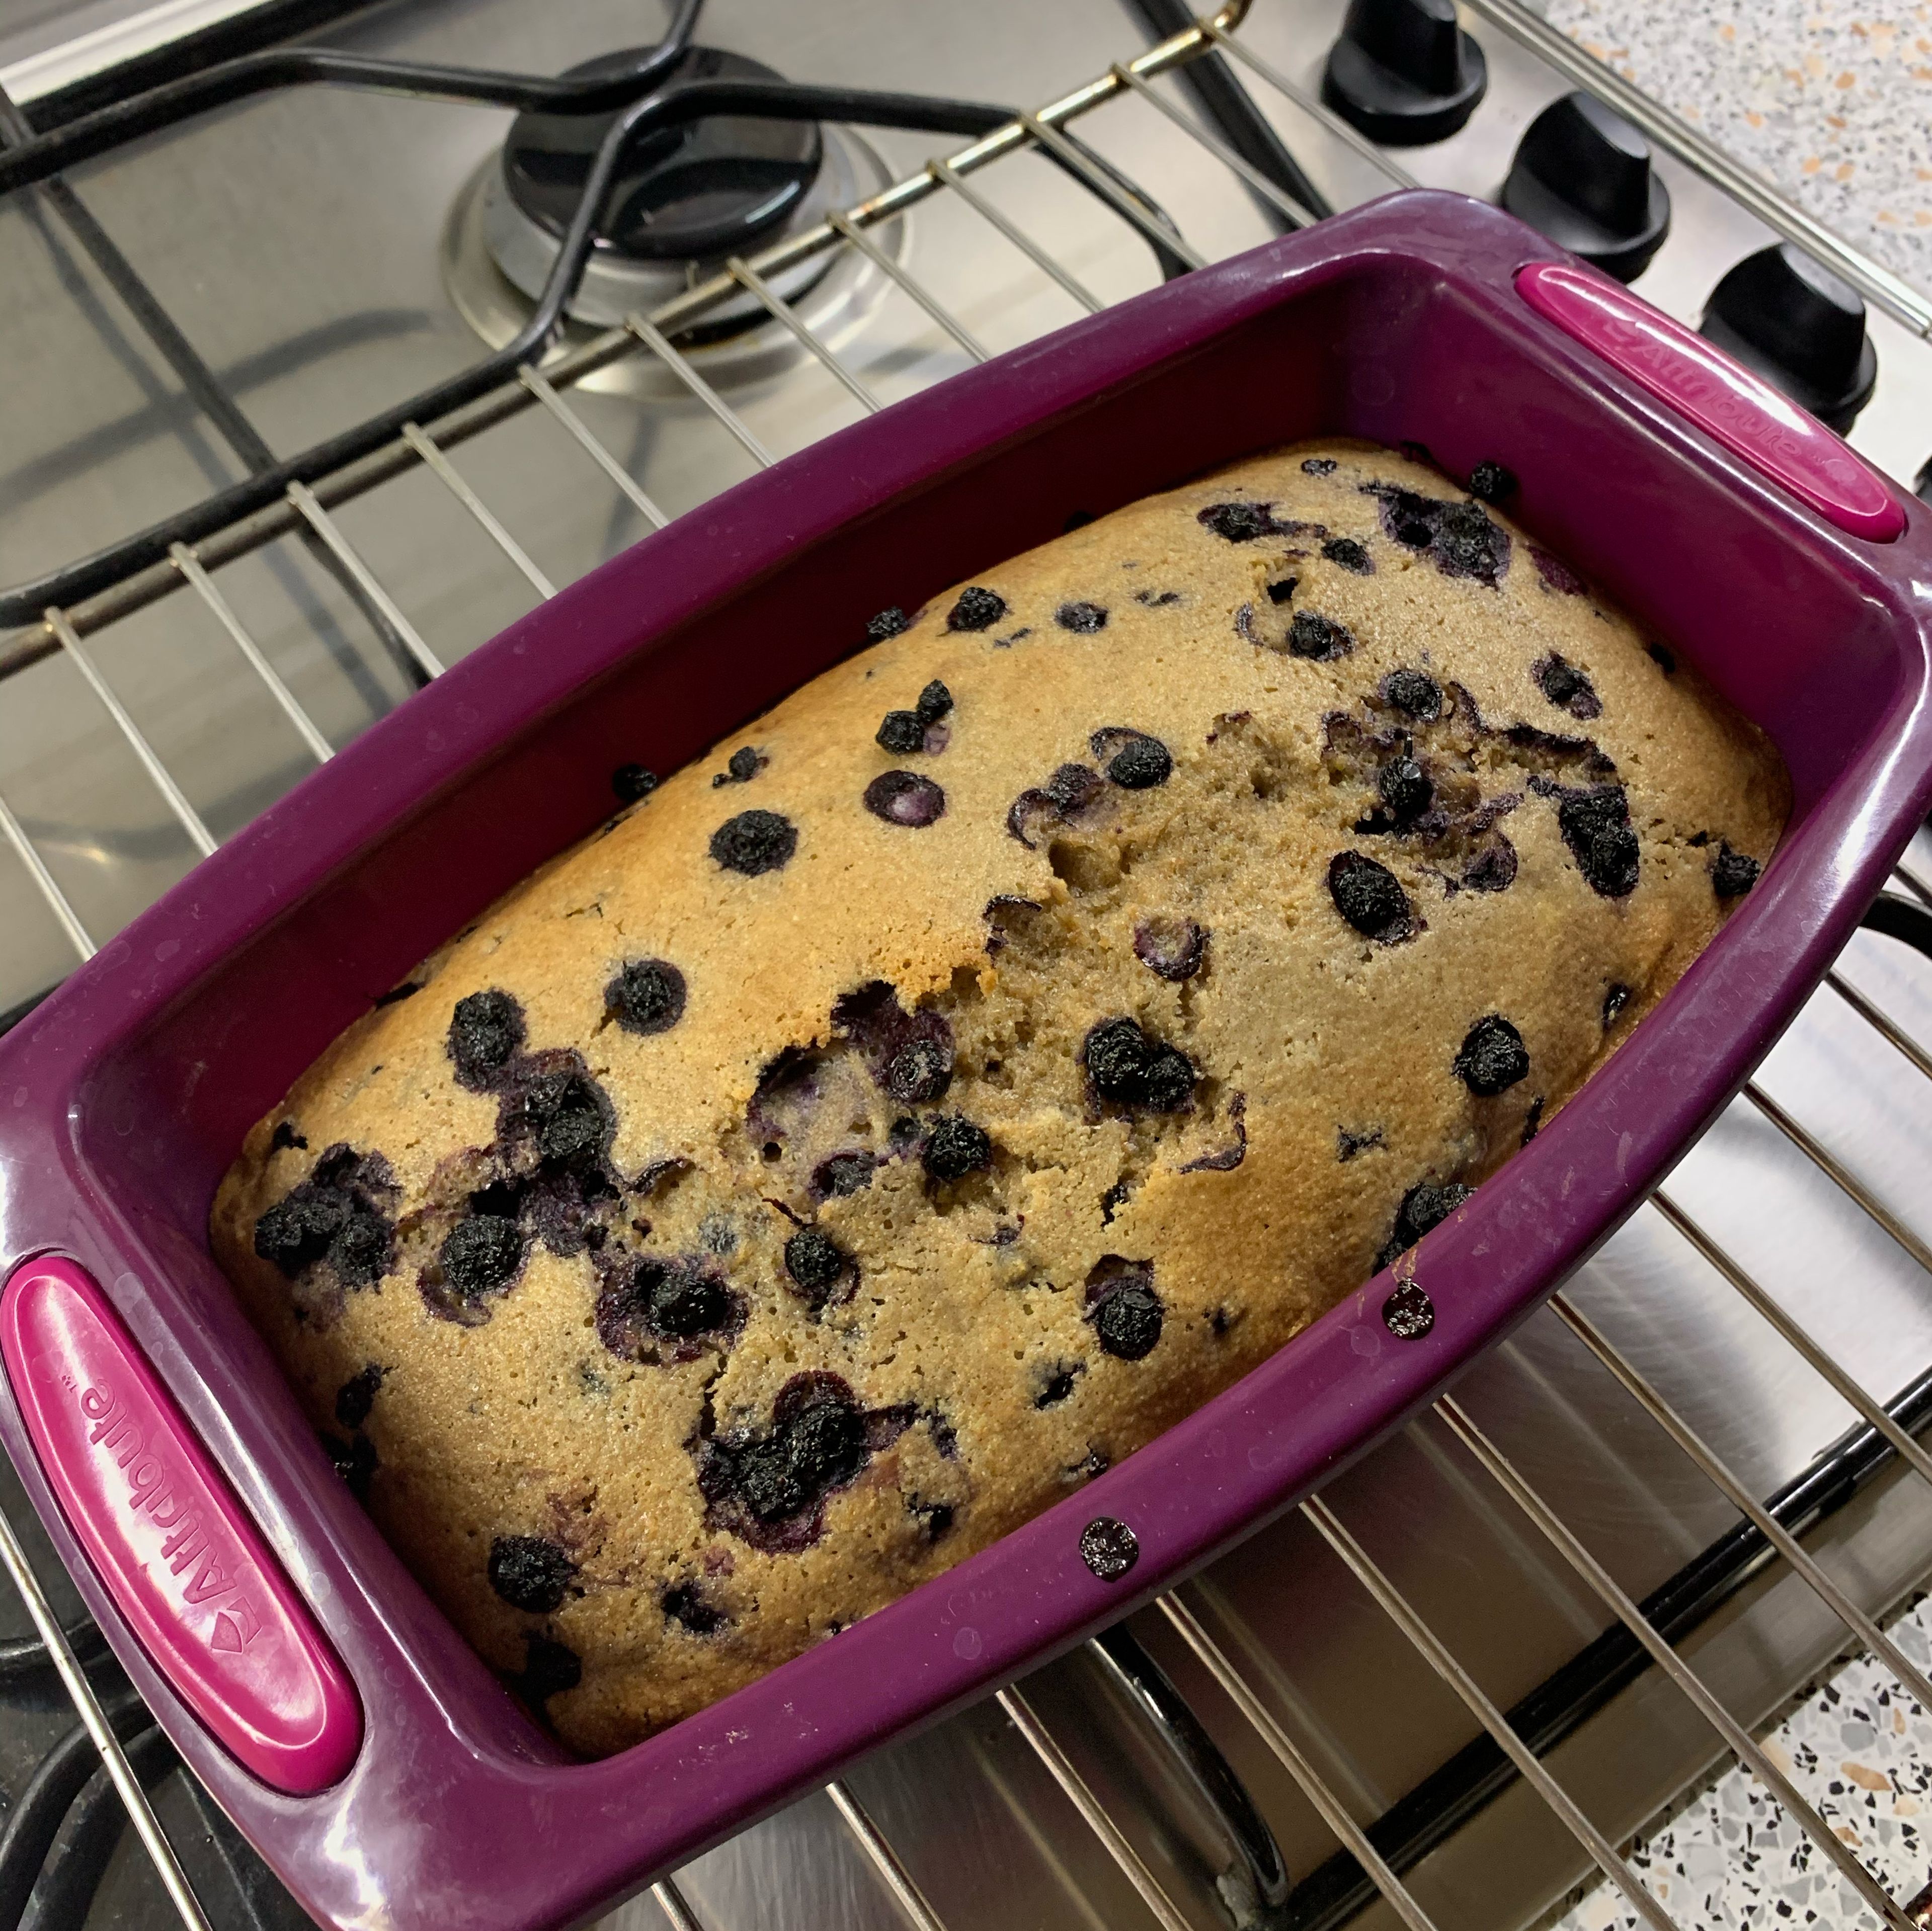 Pour the whole mixture in the bread mold and in the oven 180°C/360°F for 15 min. Then put on top remaining 50g of blueberries and coat the mold with foil and put again in the oven for 25 min. Use toothpick to check it.